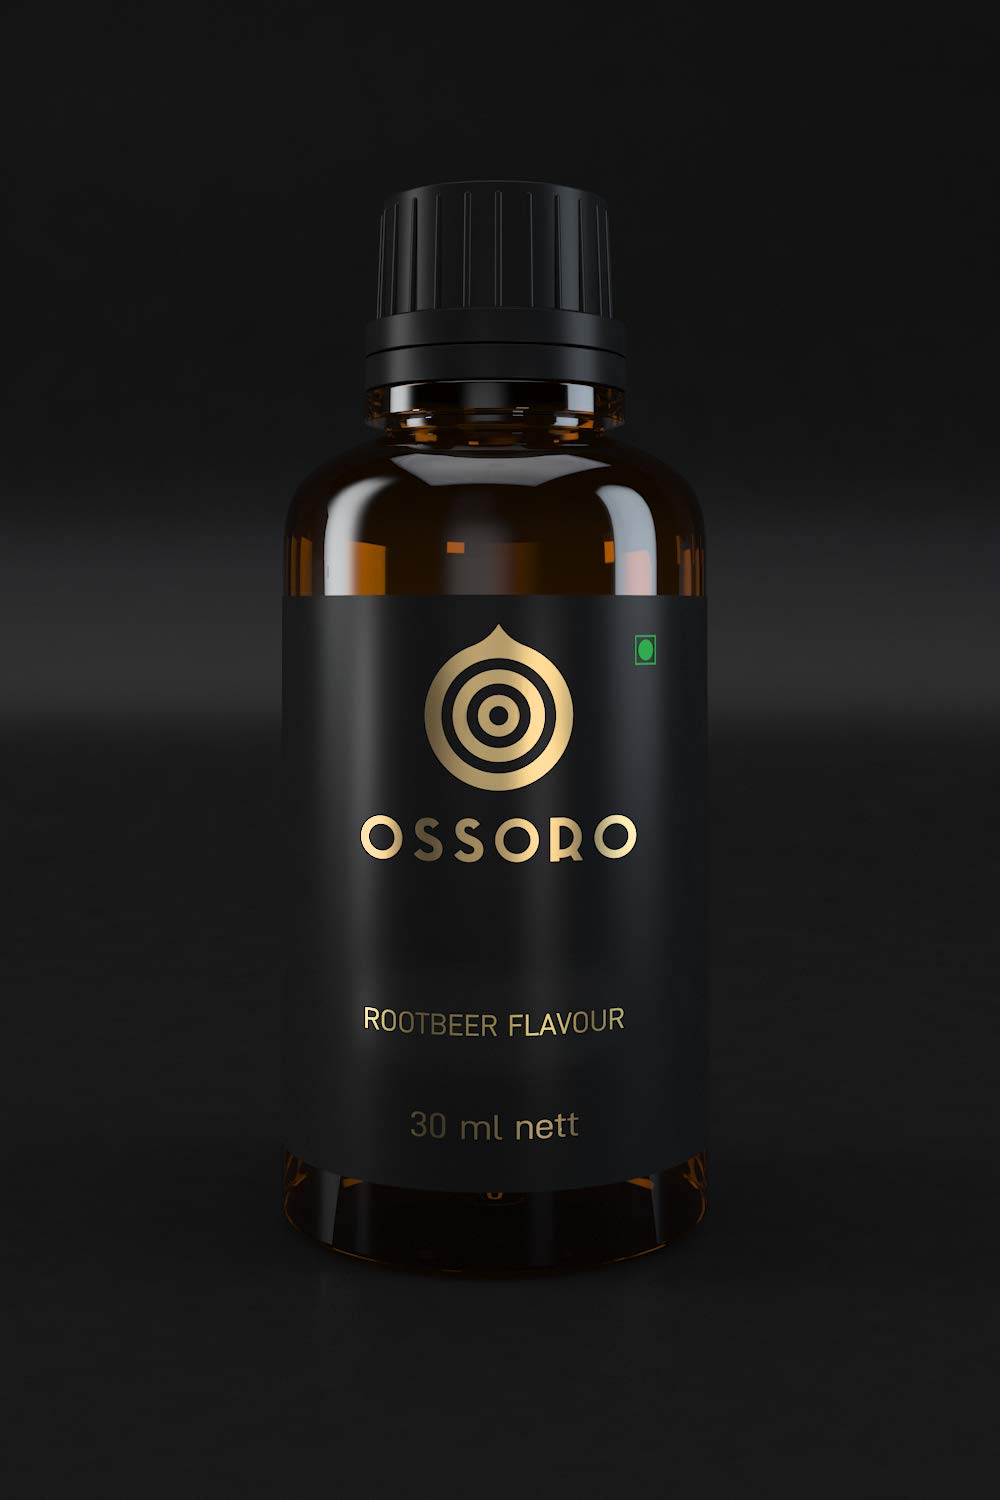 Ossoro Rootbeer Flavour Image